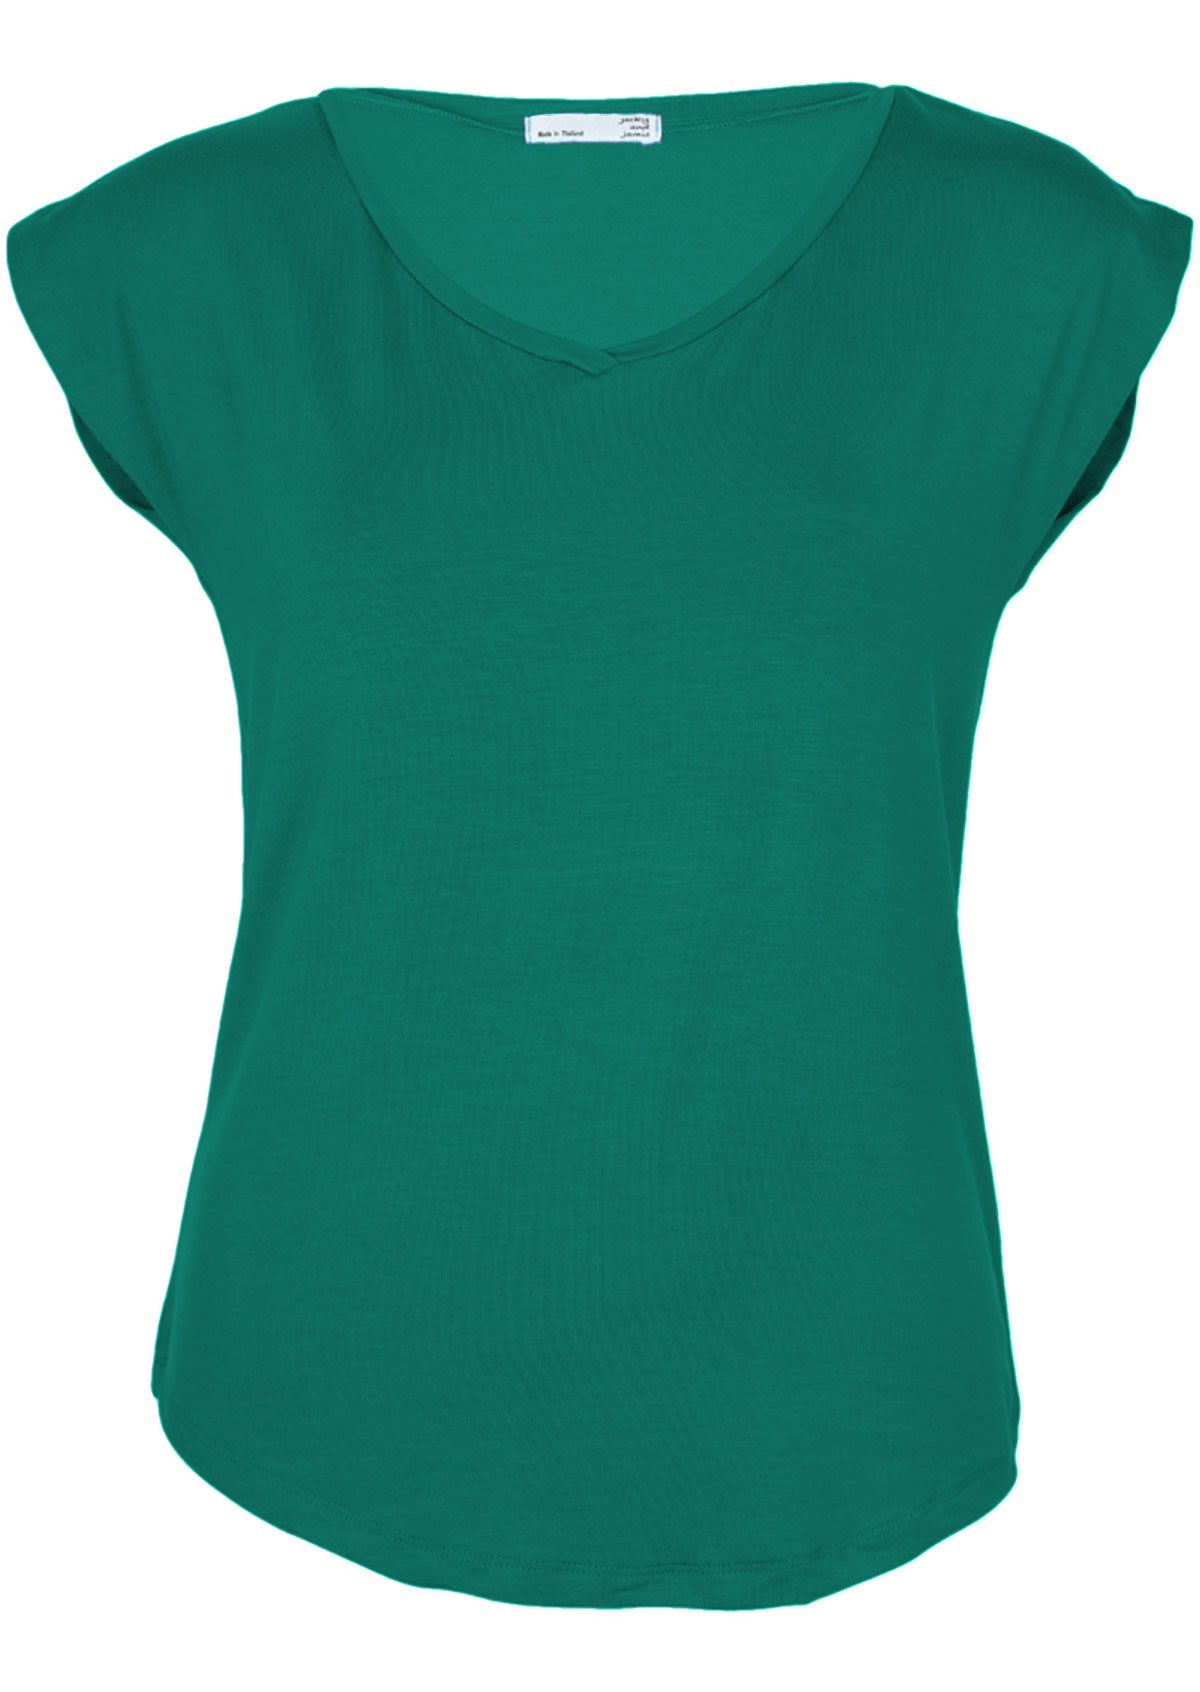 Front view of a women's green v-neck short cap sleeve rayon top